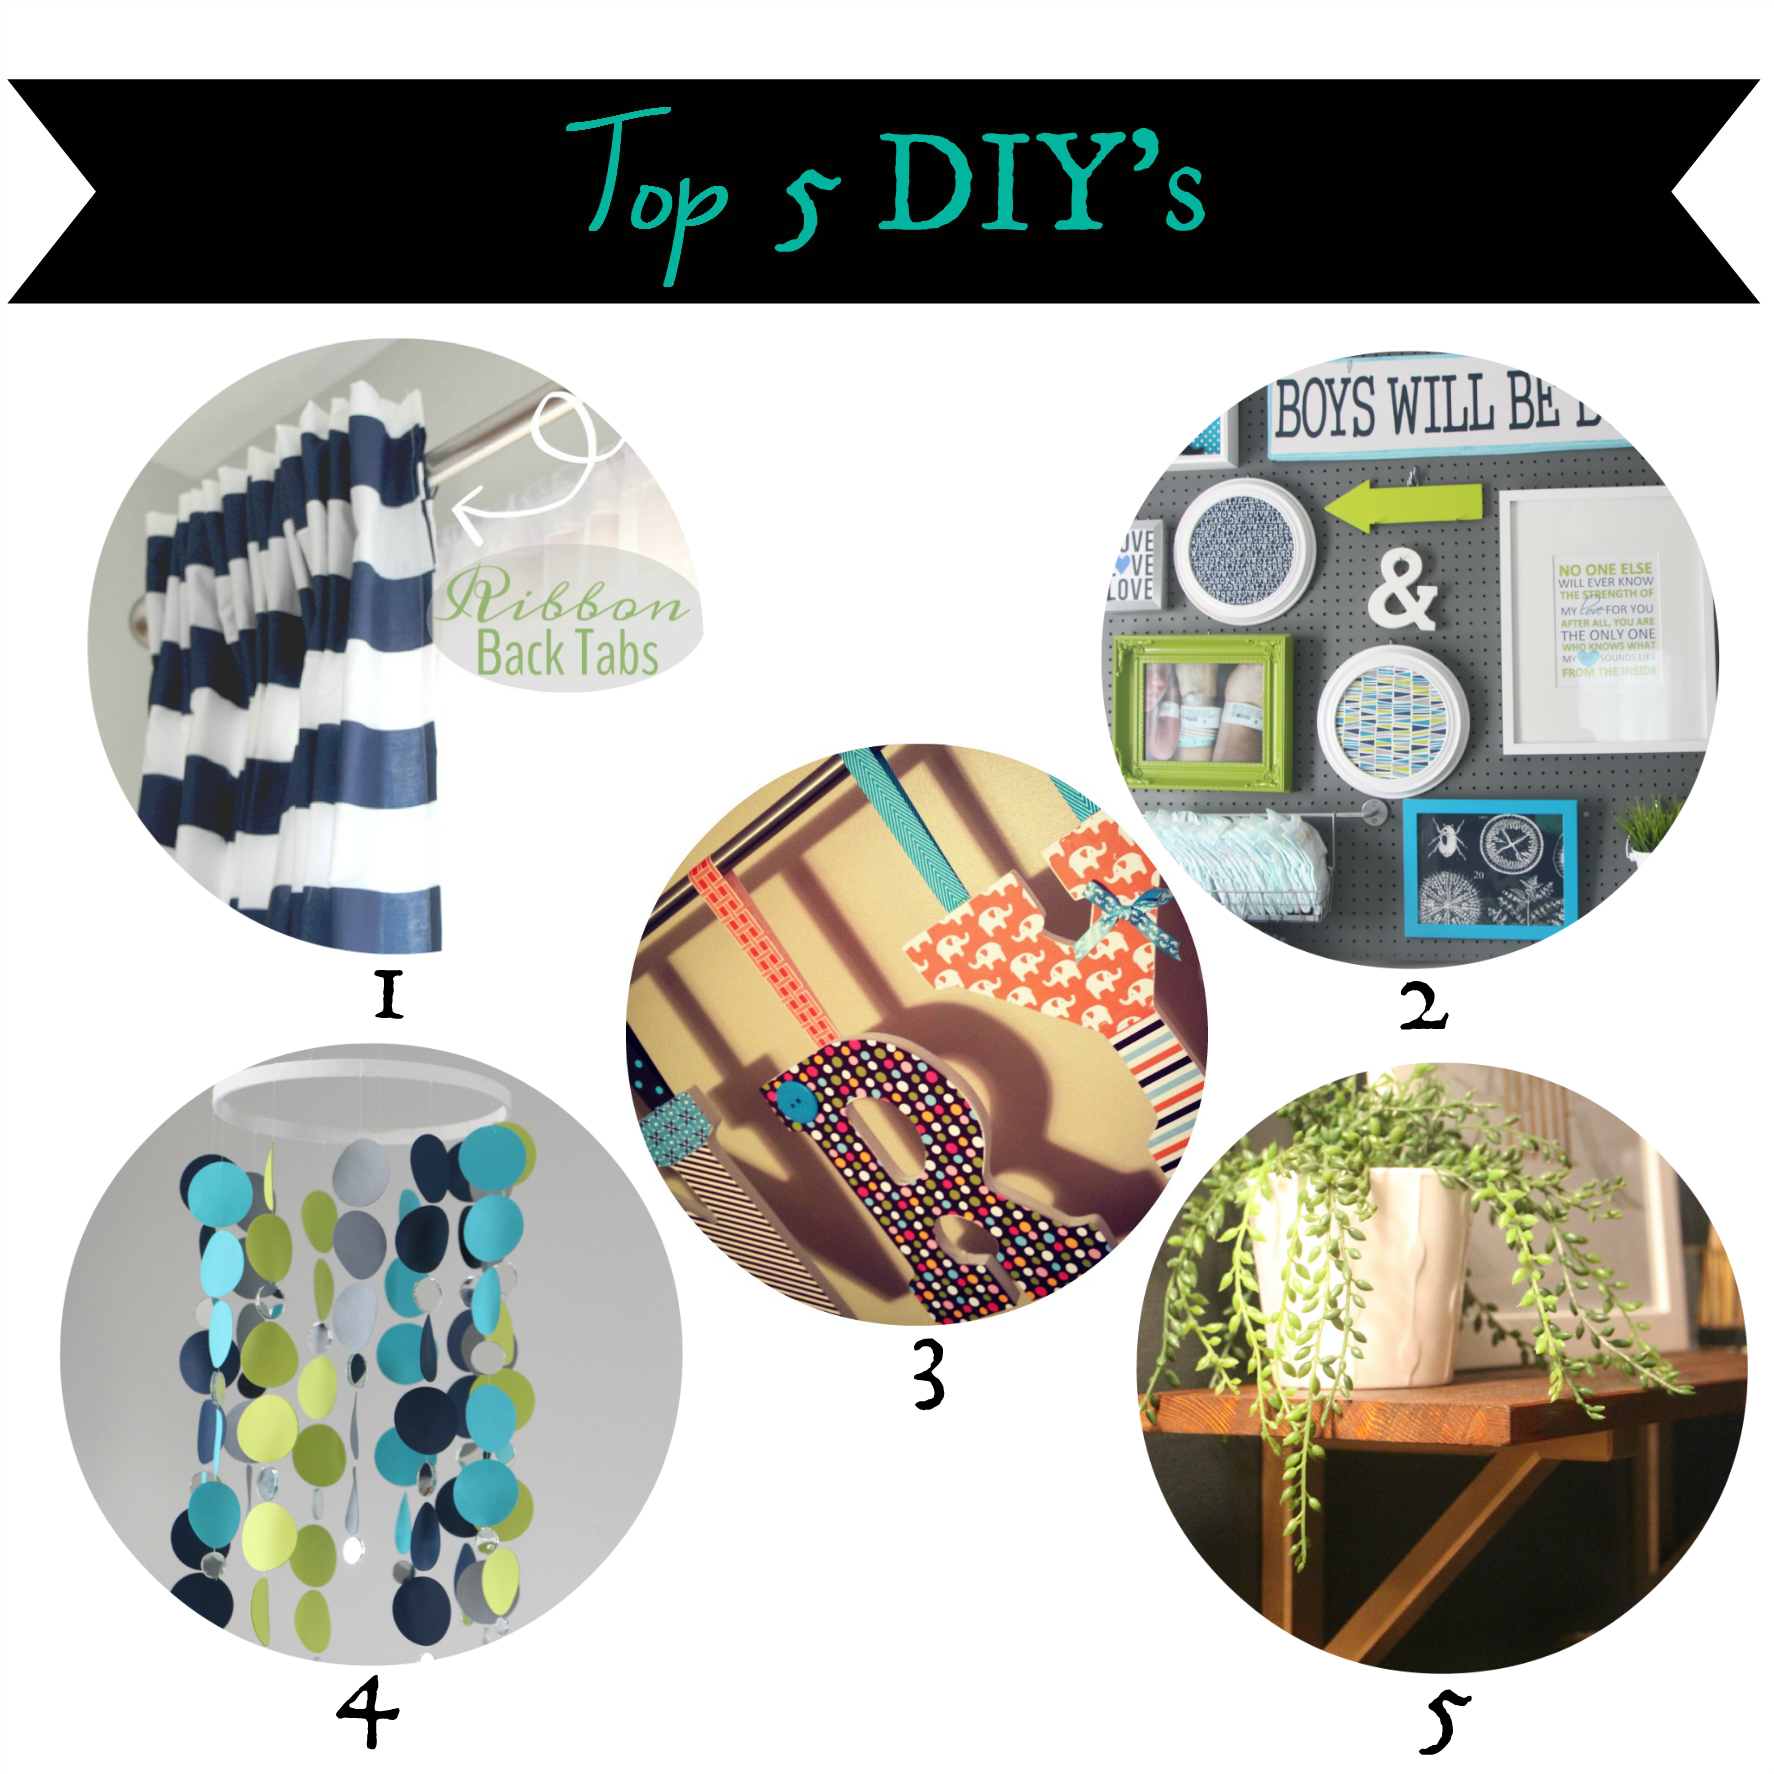 Top 5 DIY's of 2014 - this is our bliss